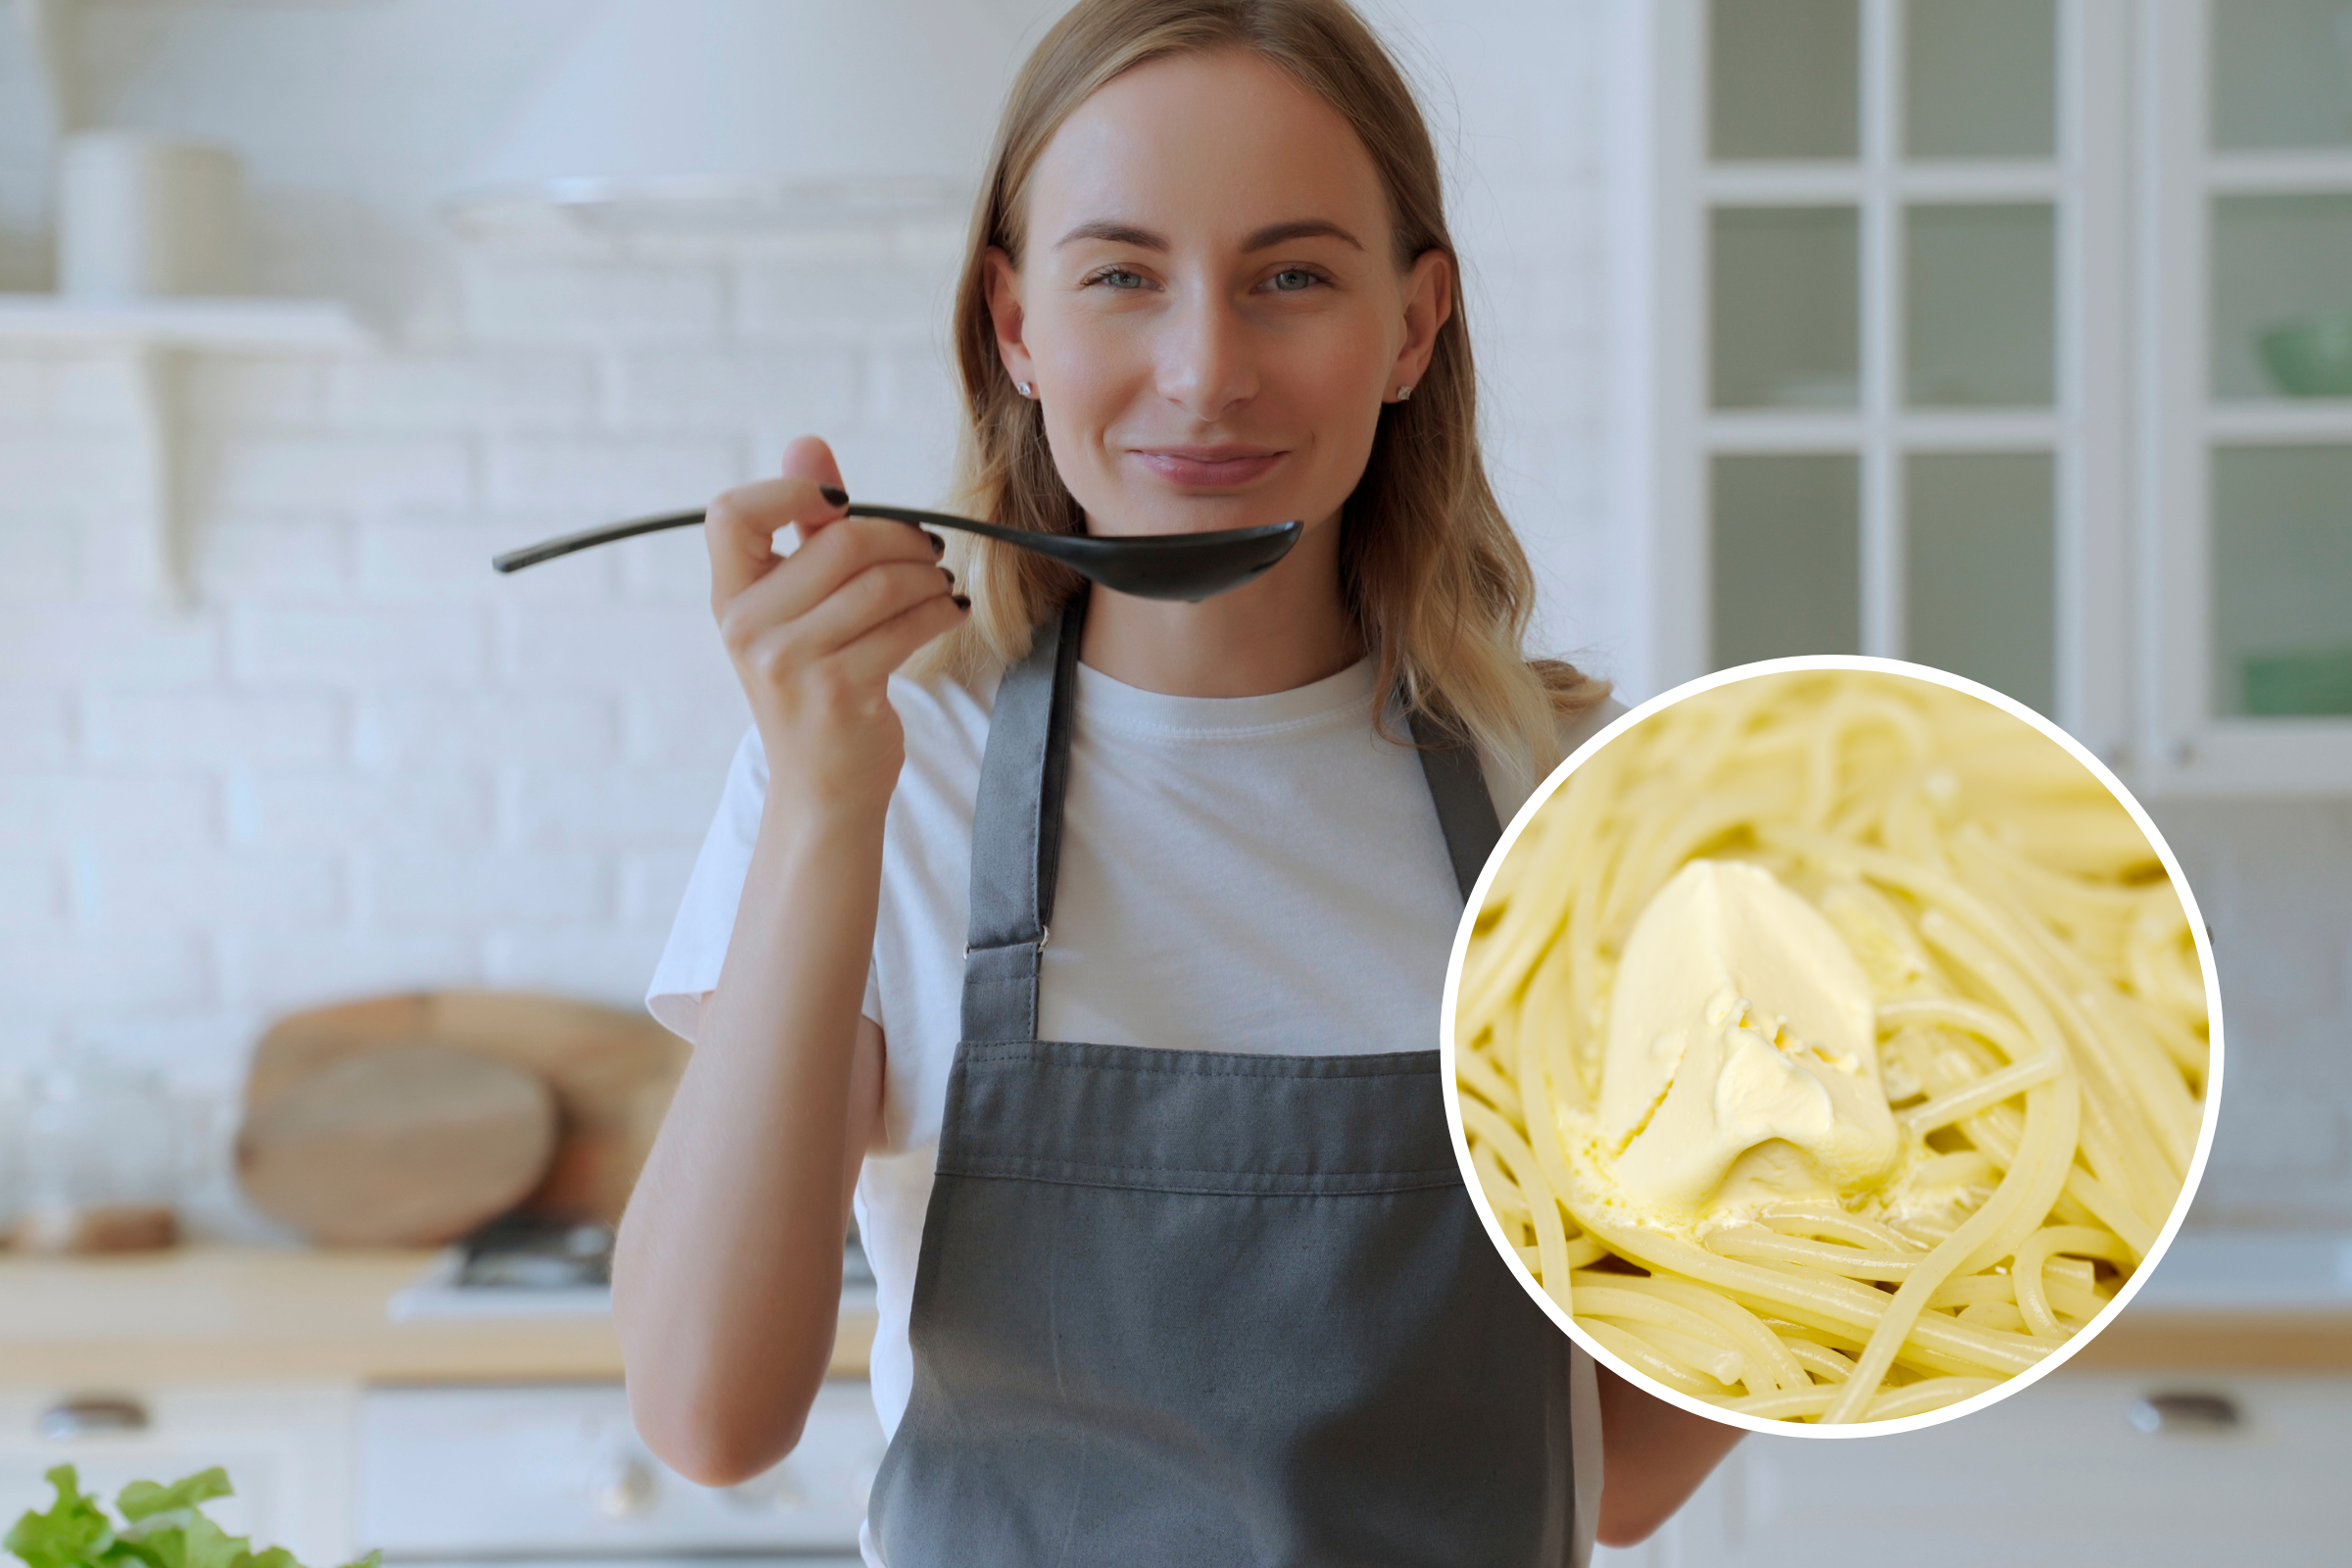 Woman Replies to Backlash Over Adding Butter to Boyfriend's Food